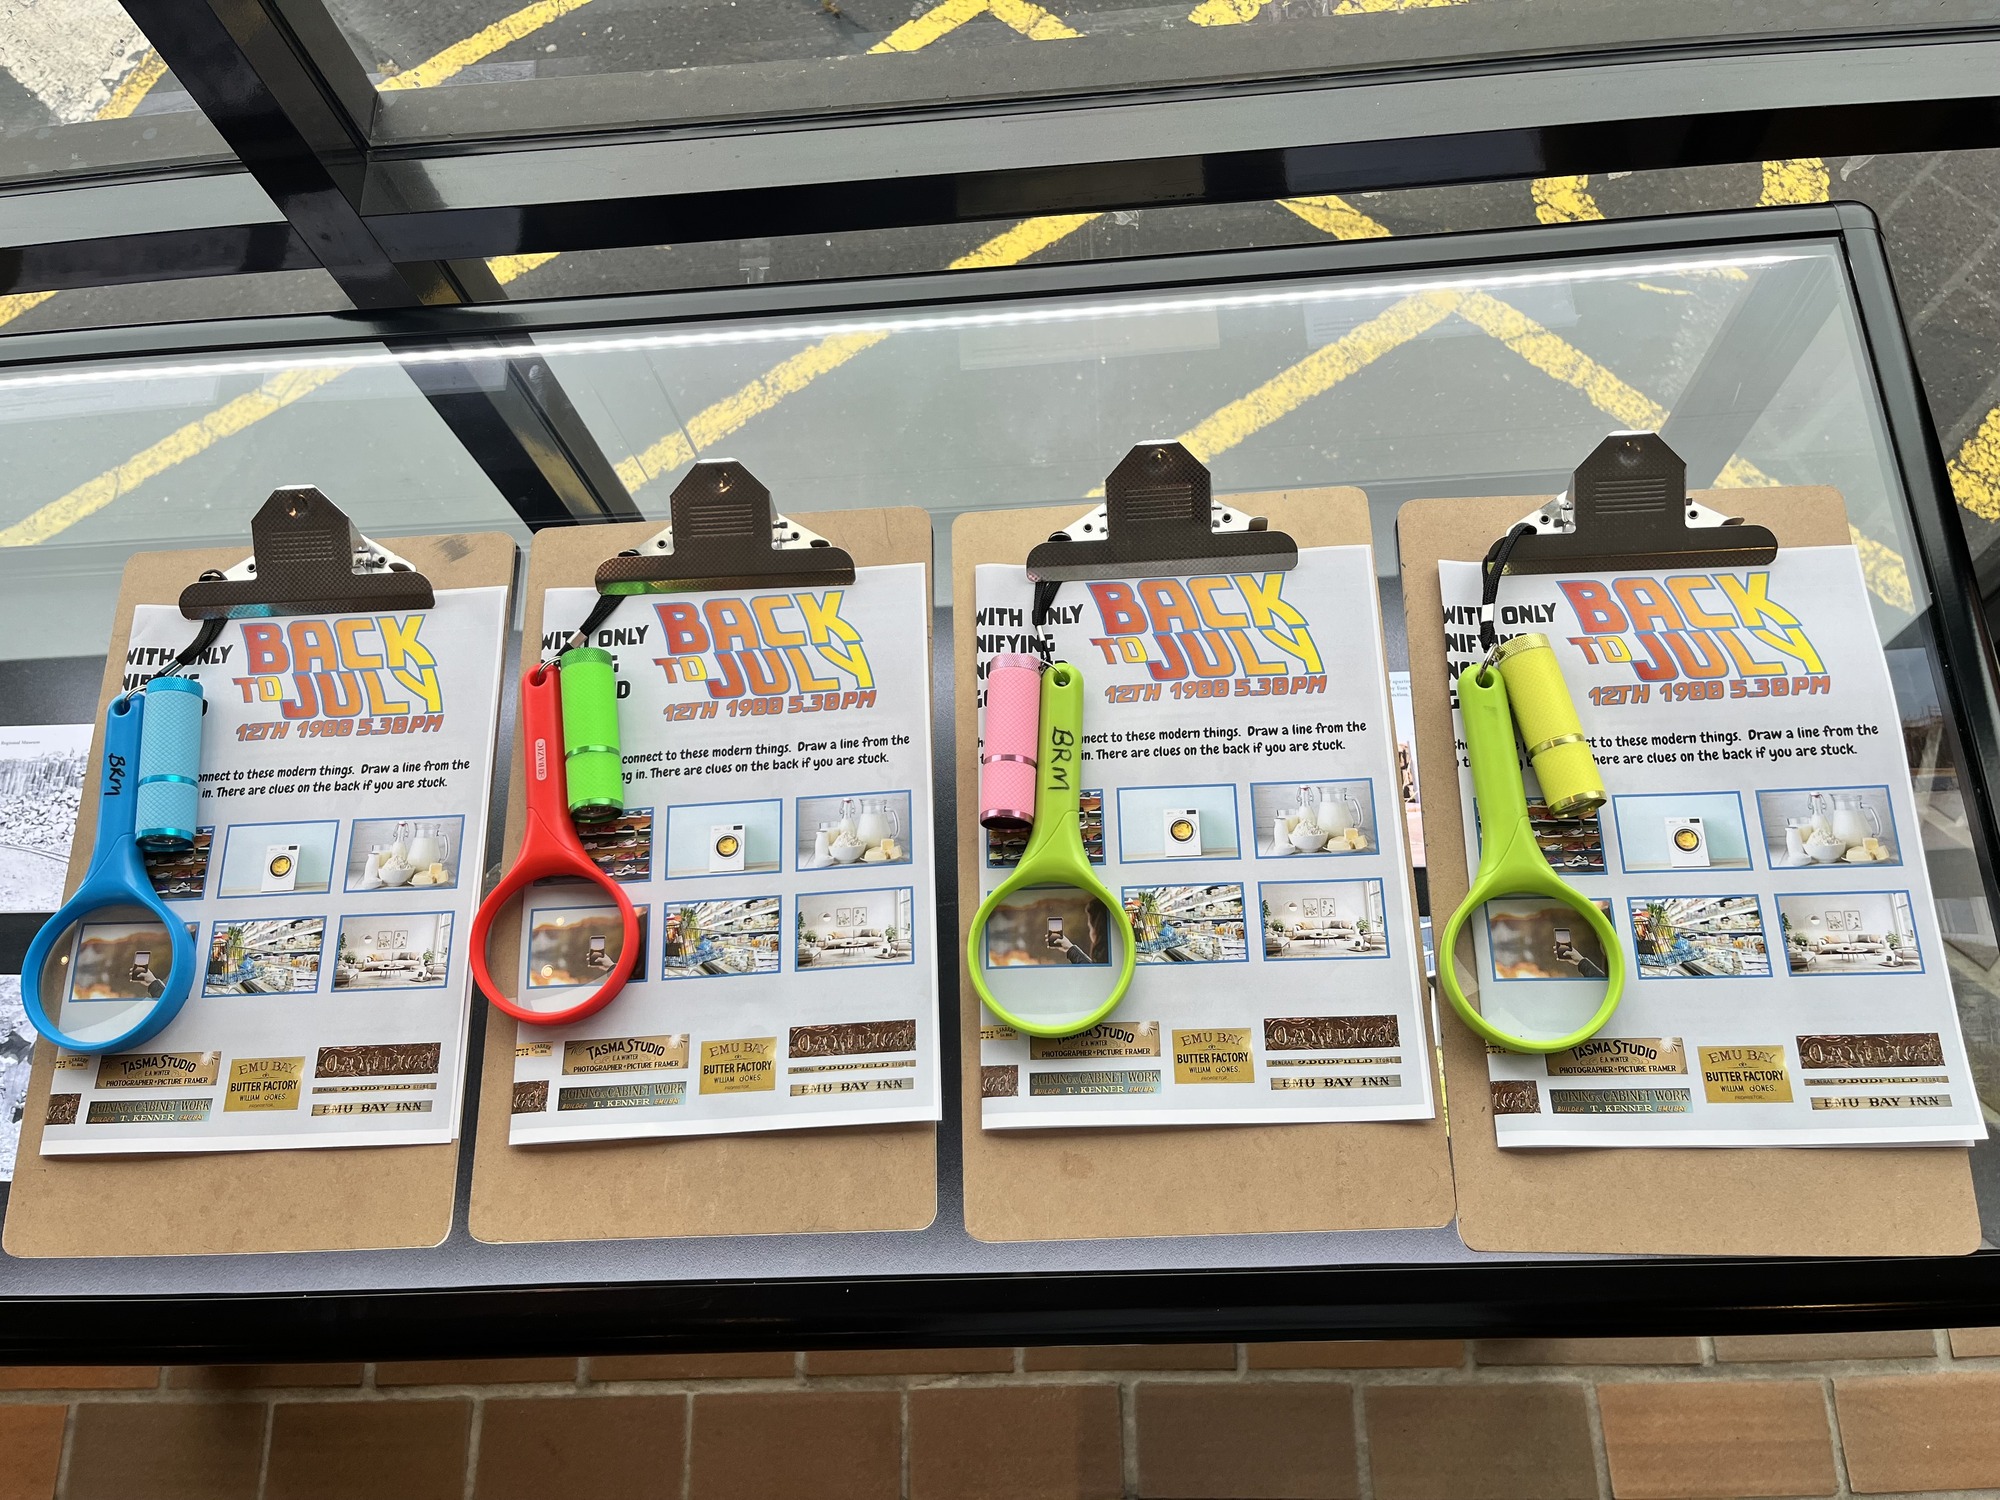 Four clipboards sit on top of a table, each with an activity print-out called 'Back to July' clipped in to place and a magnifying glass and torch hanging from the board. The activity print-out is folded over so not all of it can be seen, but it indicates that the person taking part in the activity needs to follow clues and find things.